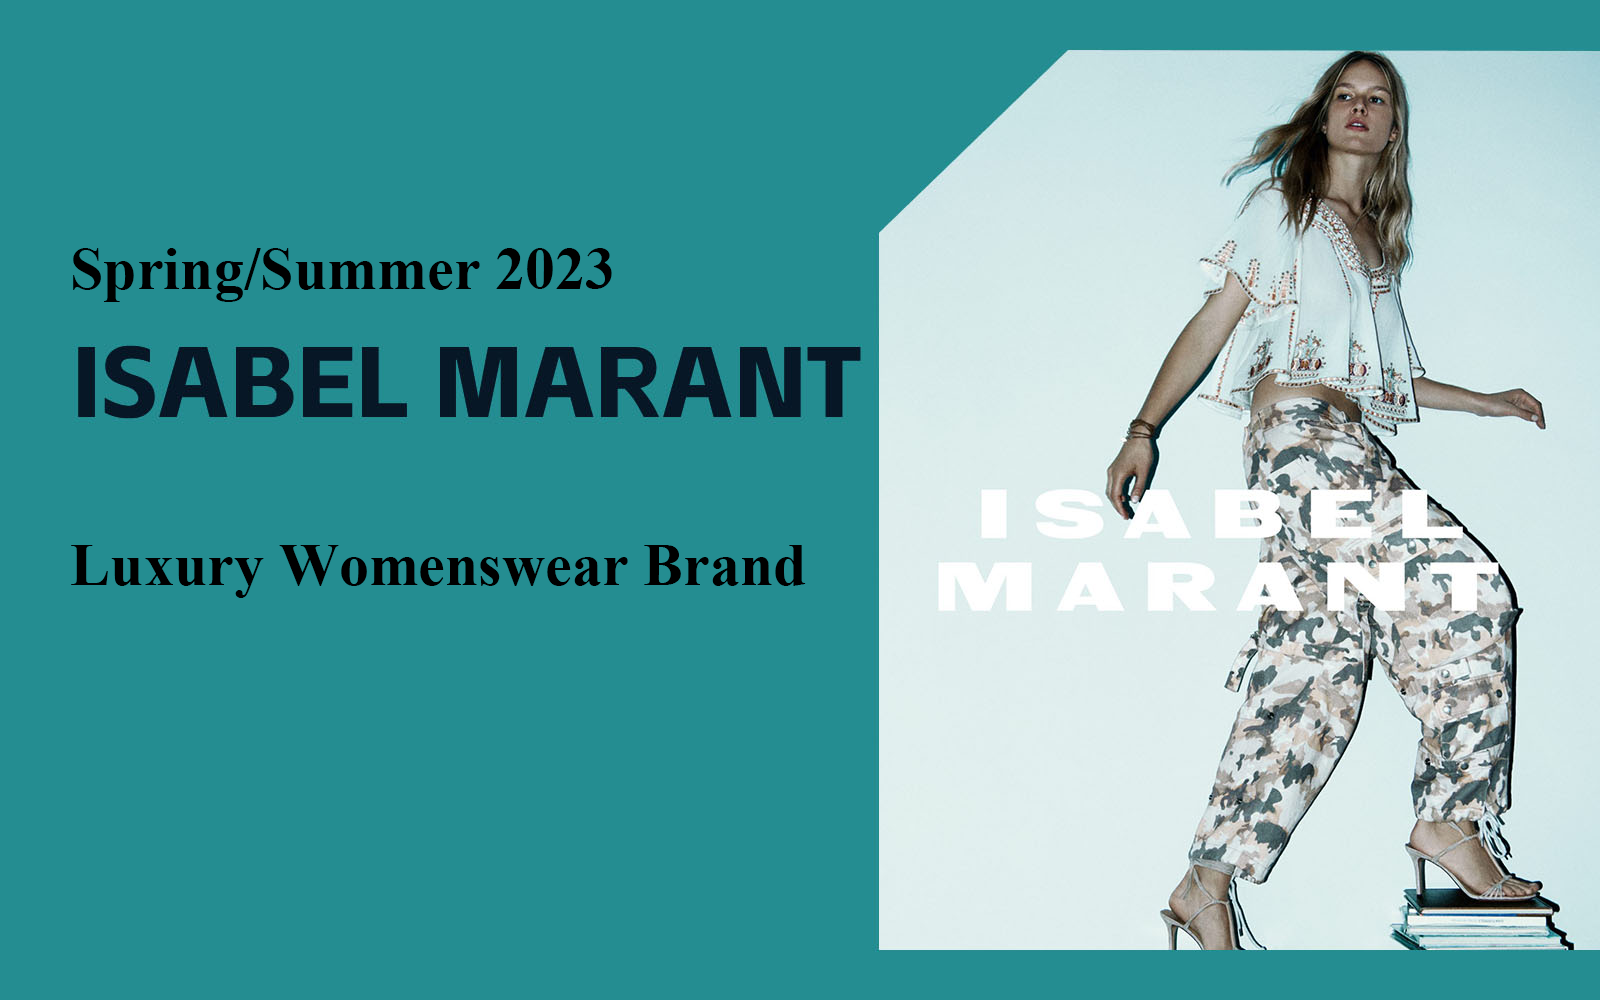 French Y2K -- The Analysis of Isabel Marant The Luxury Womenswear Brand